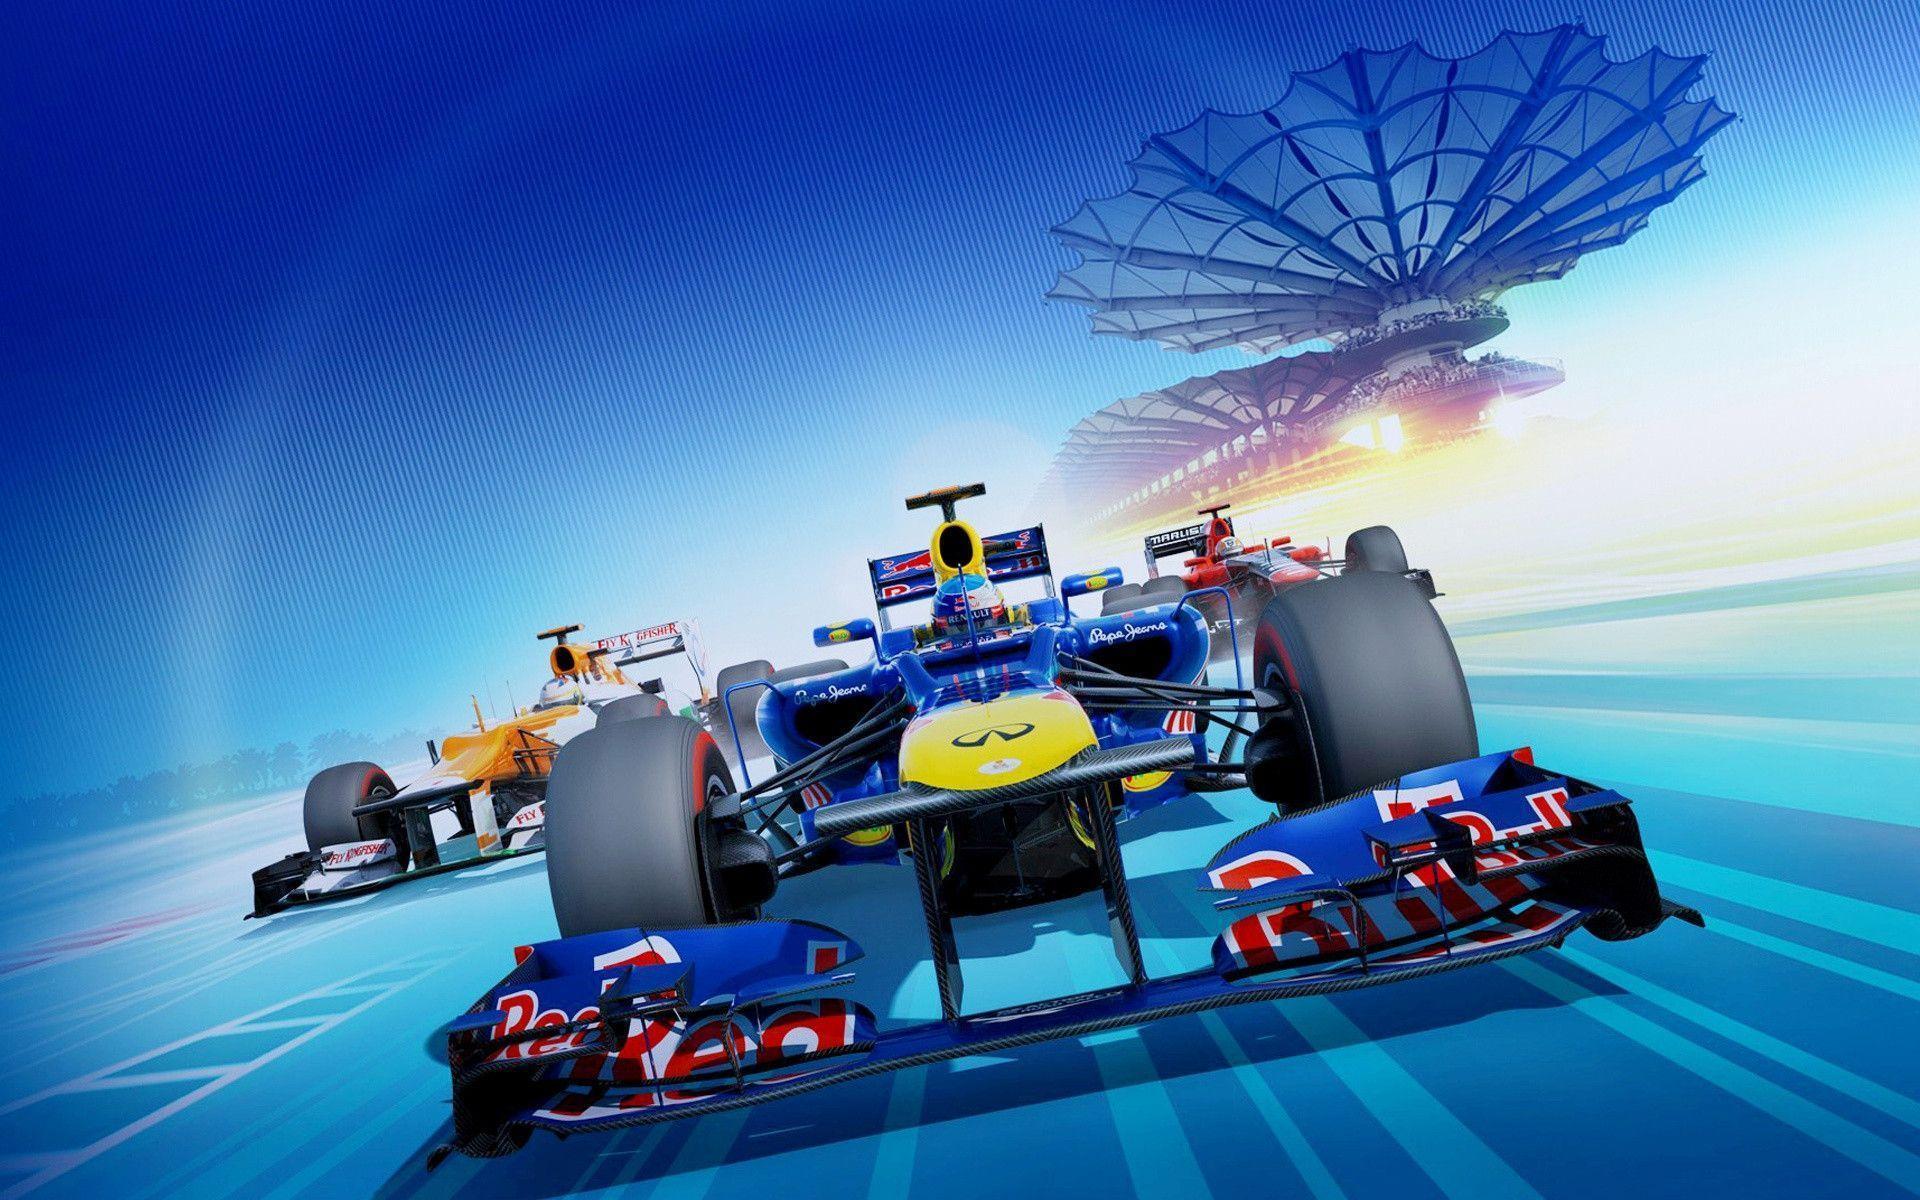 One Cars F1 Wallpaper in HD For Free Download